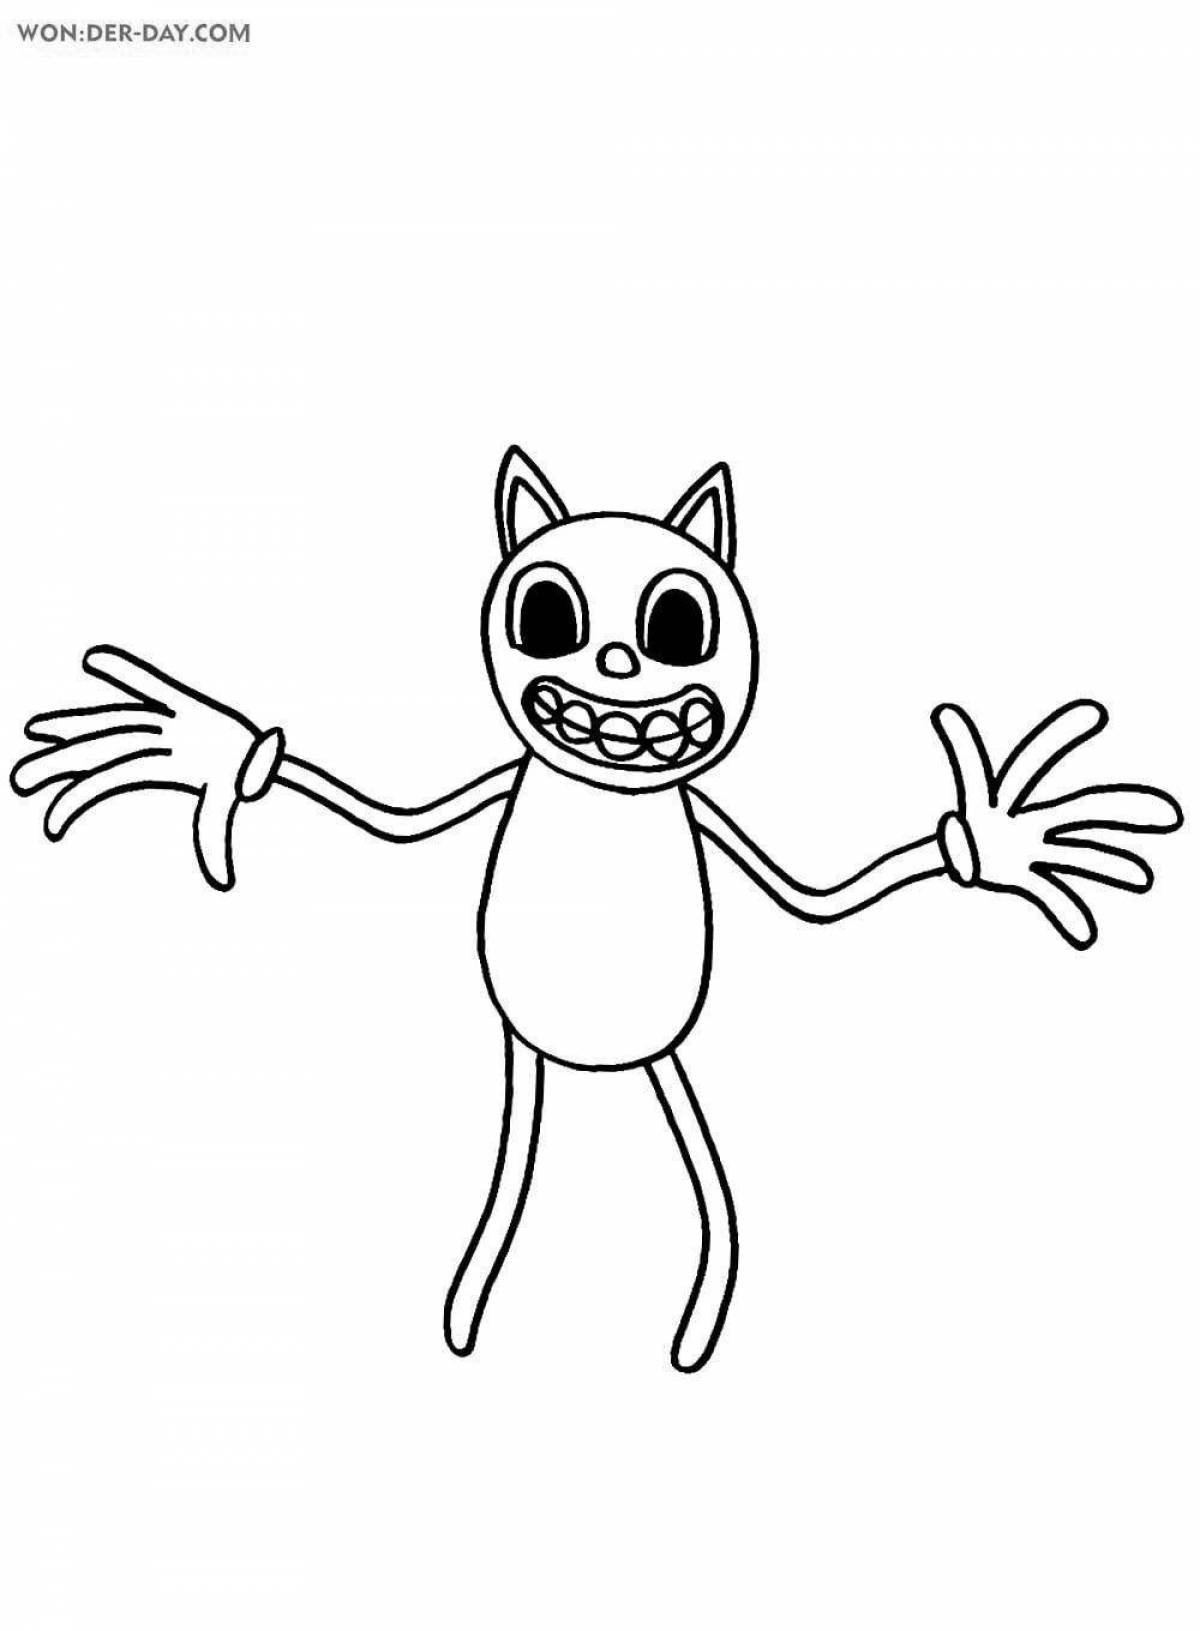 Playful cartunkette coloring page